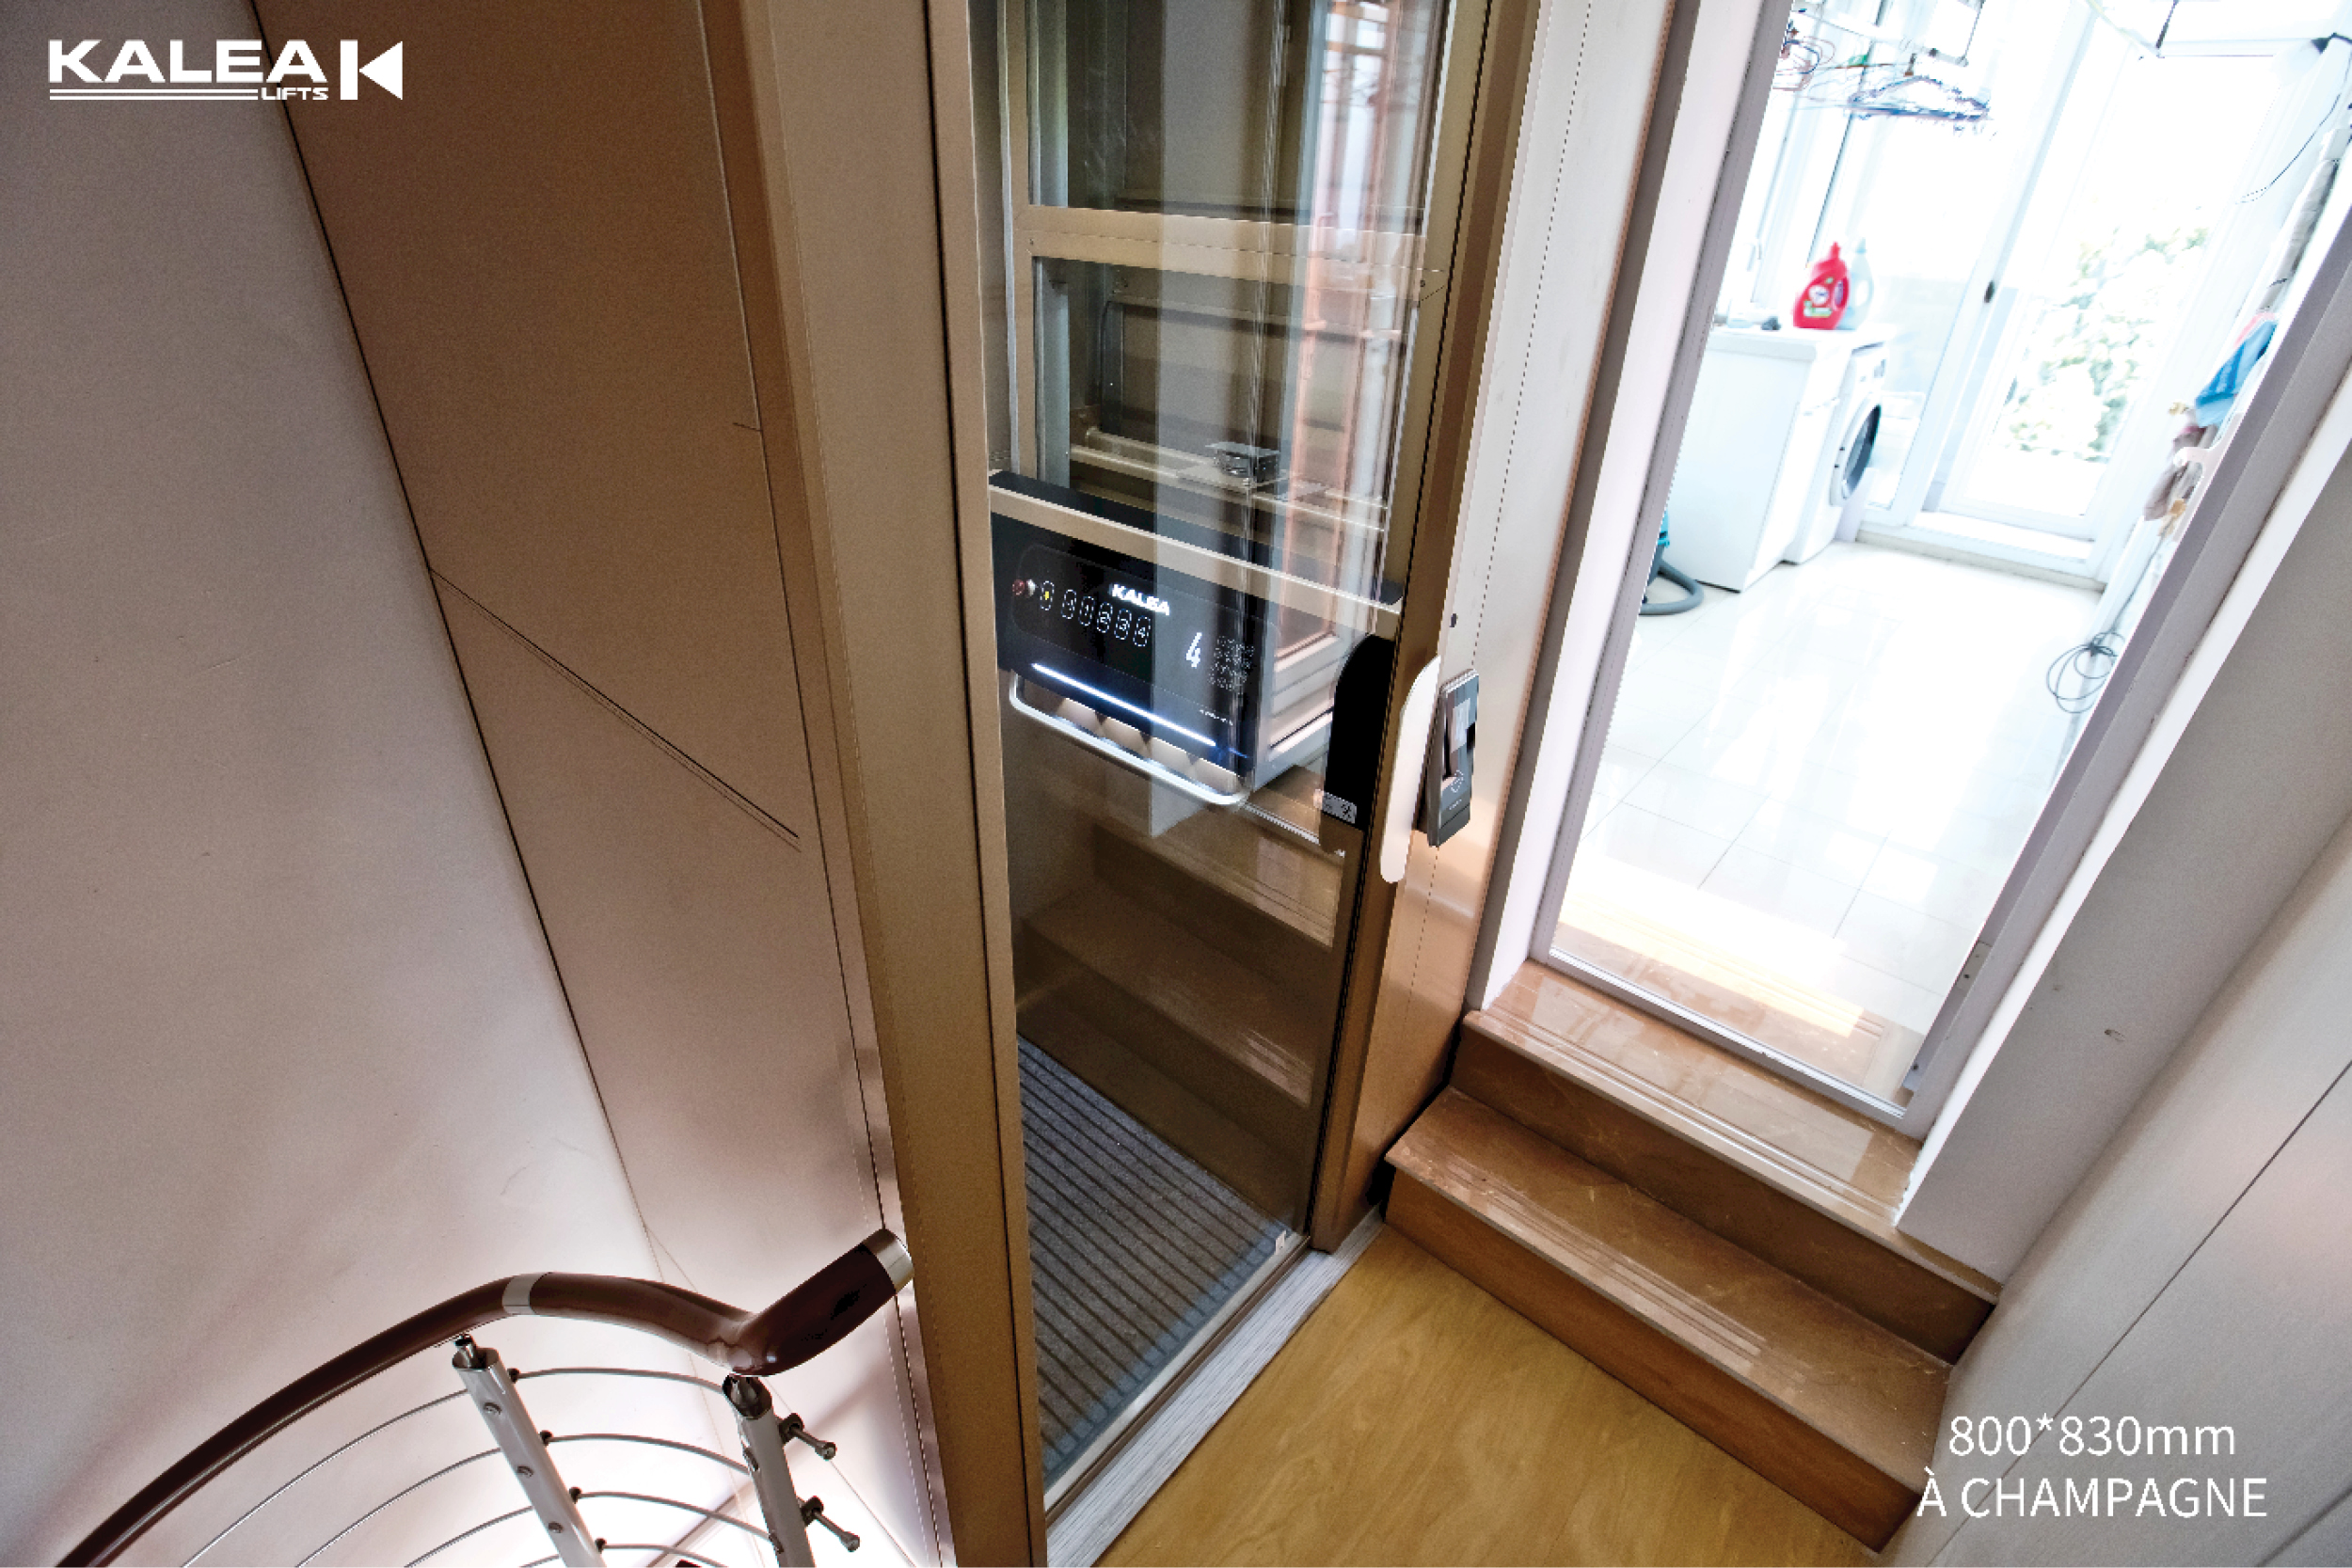 Private Home, Kosmos K70 model, Platform Size 800 x830mm, 1 Side Glass Shaft Powder Coated Anodic Champagne